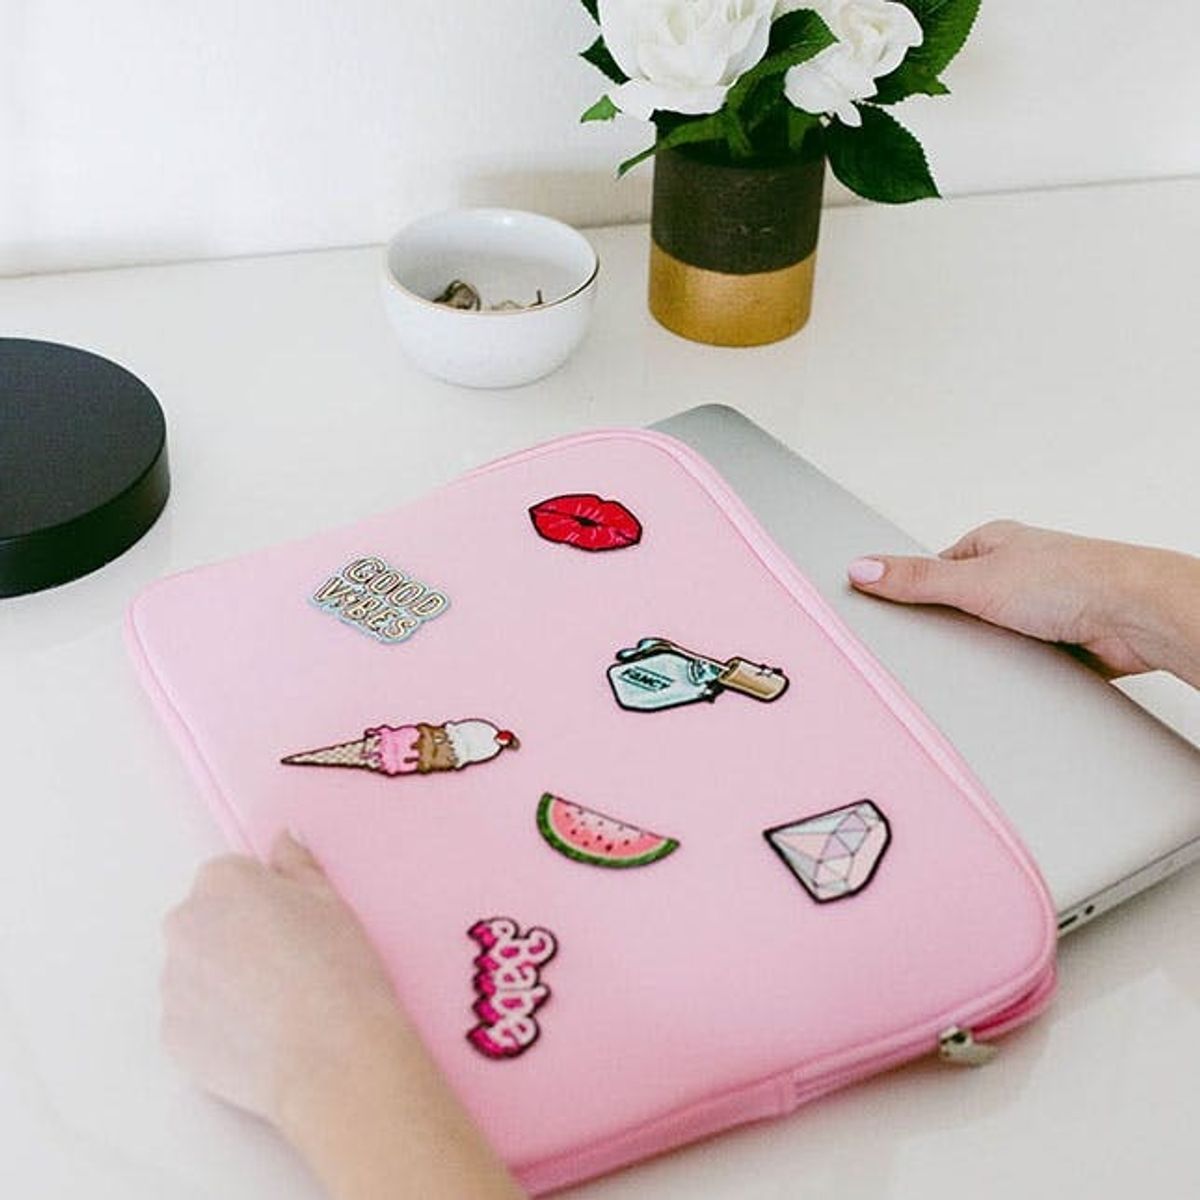 9 DIY Stylish Tech Accessories to Upgrade Your Life